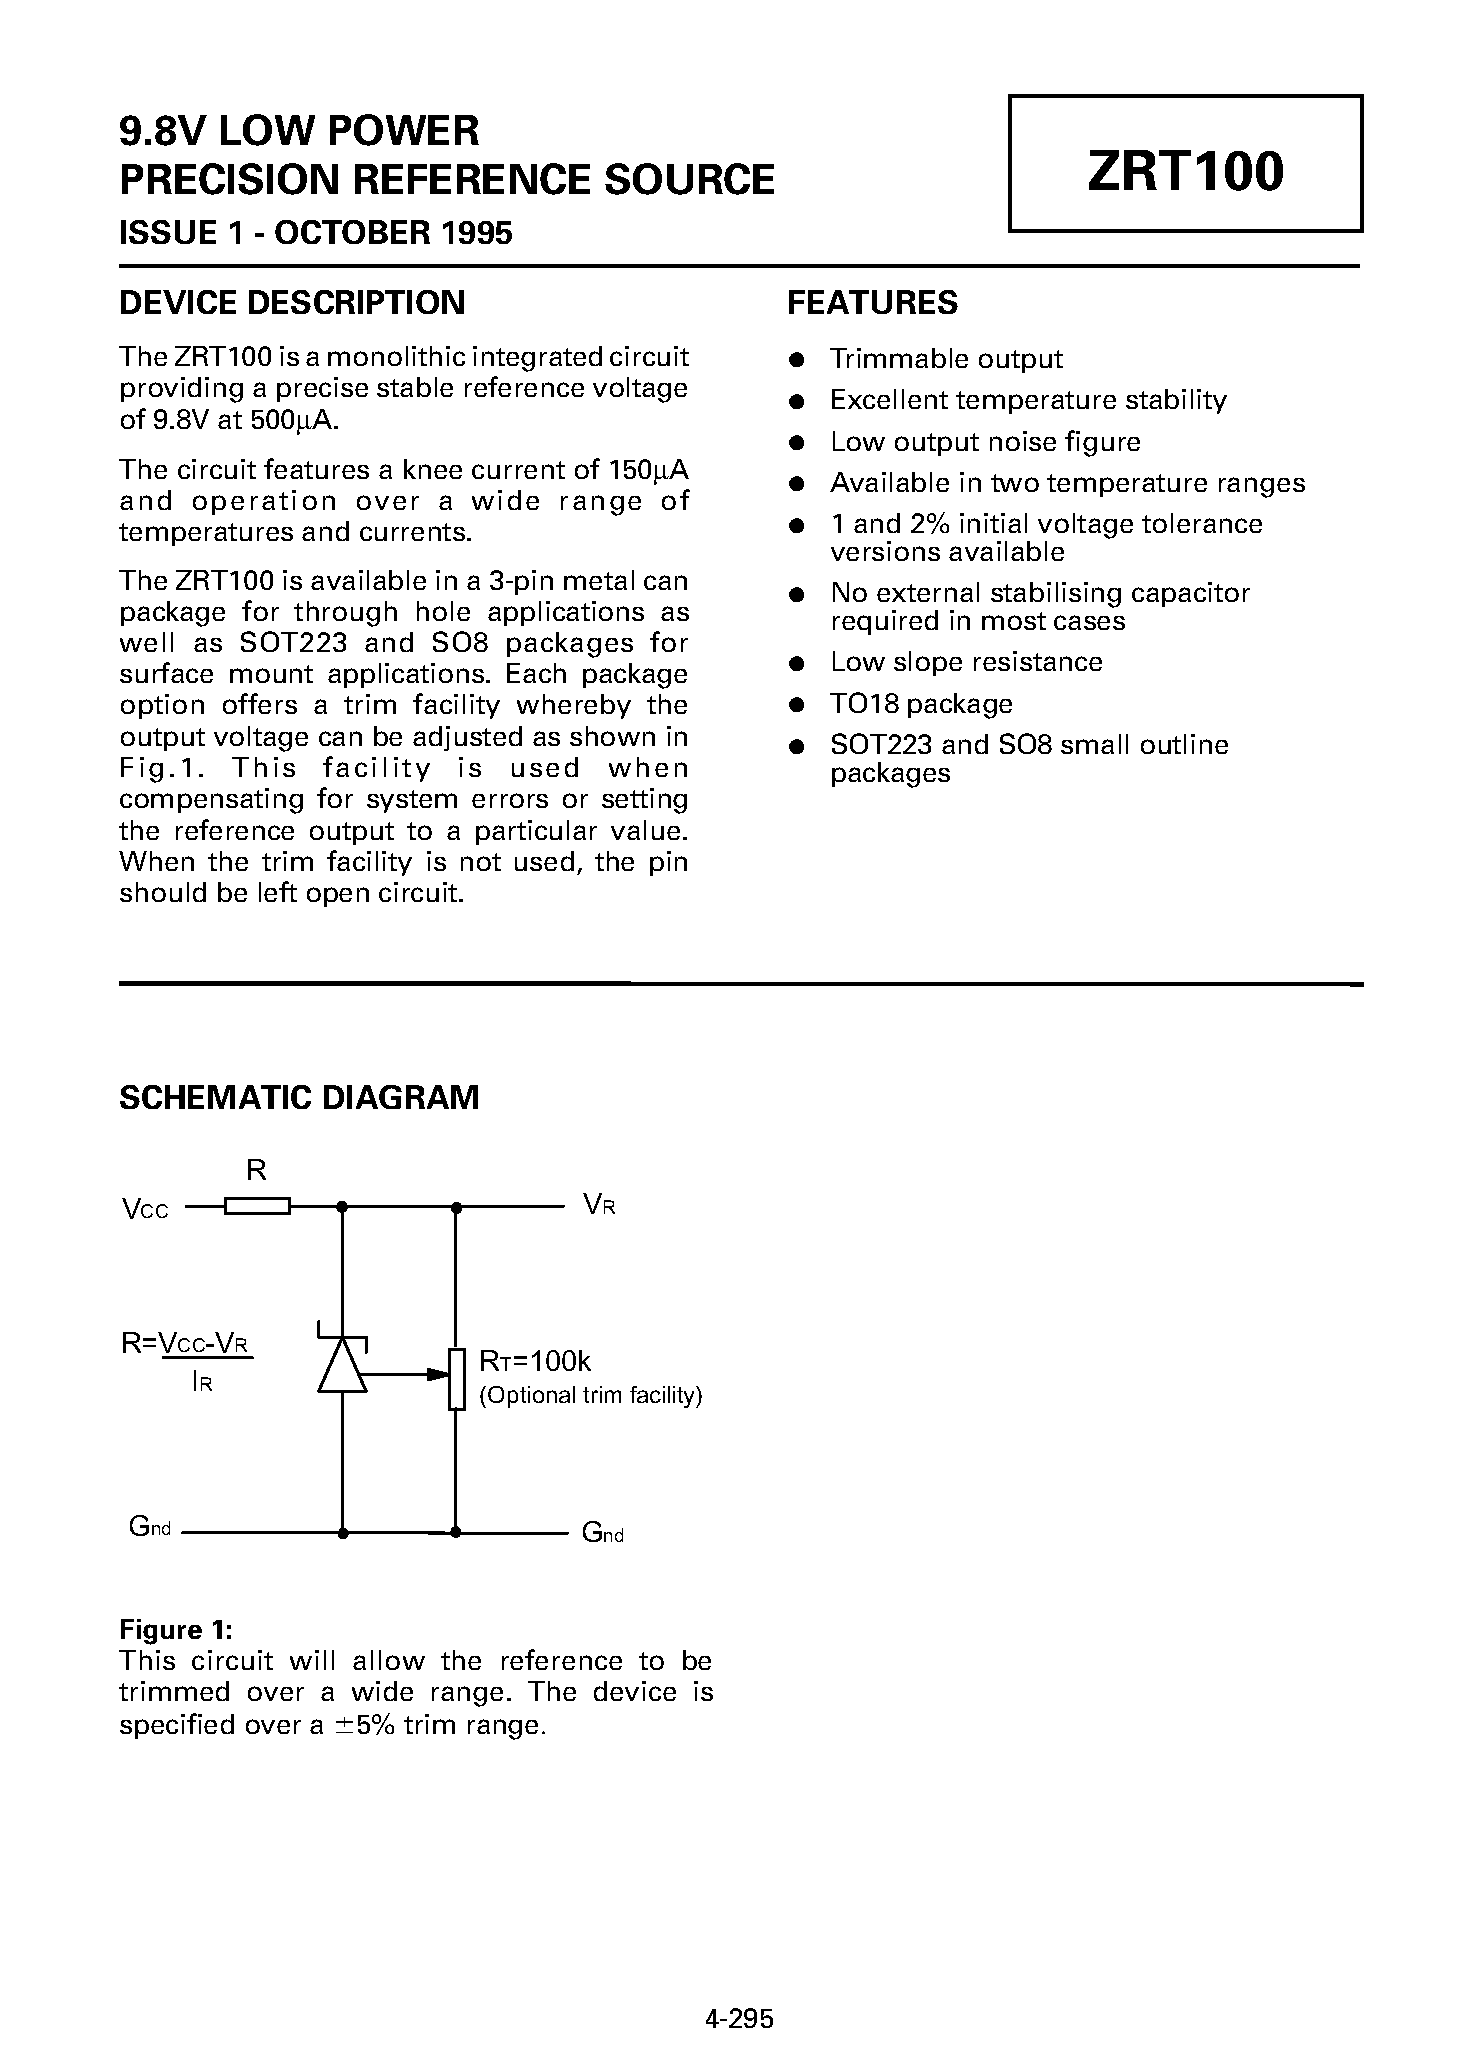 Datasheet ZRT100N8C2 - 9.8V LOW POWER PRECISION REFERENCE SOURCE page 1